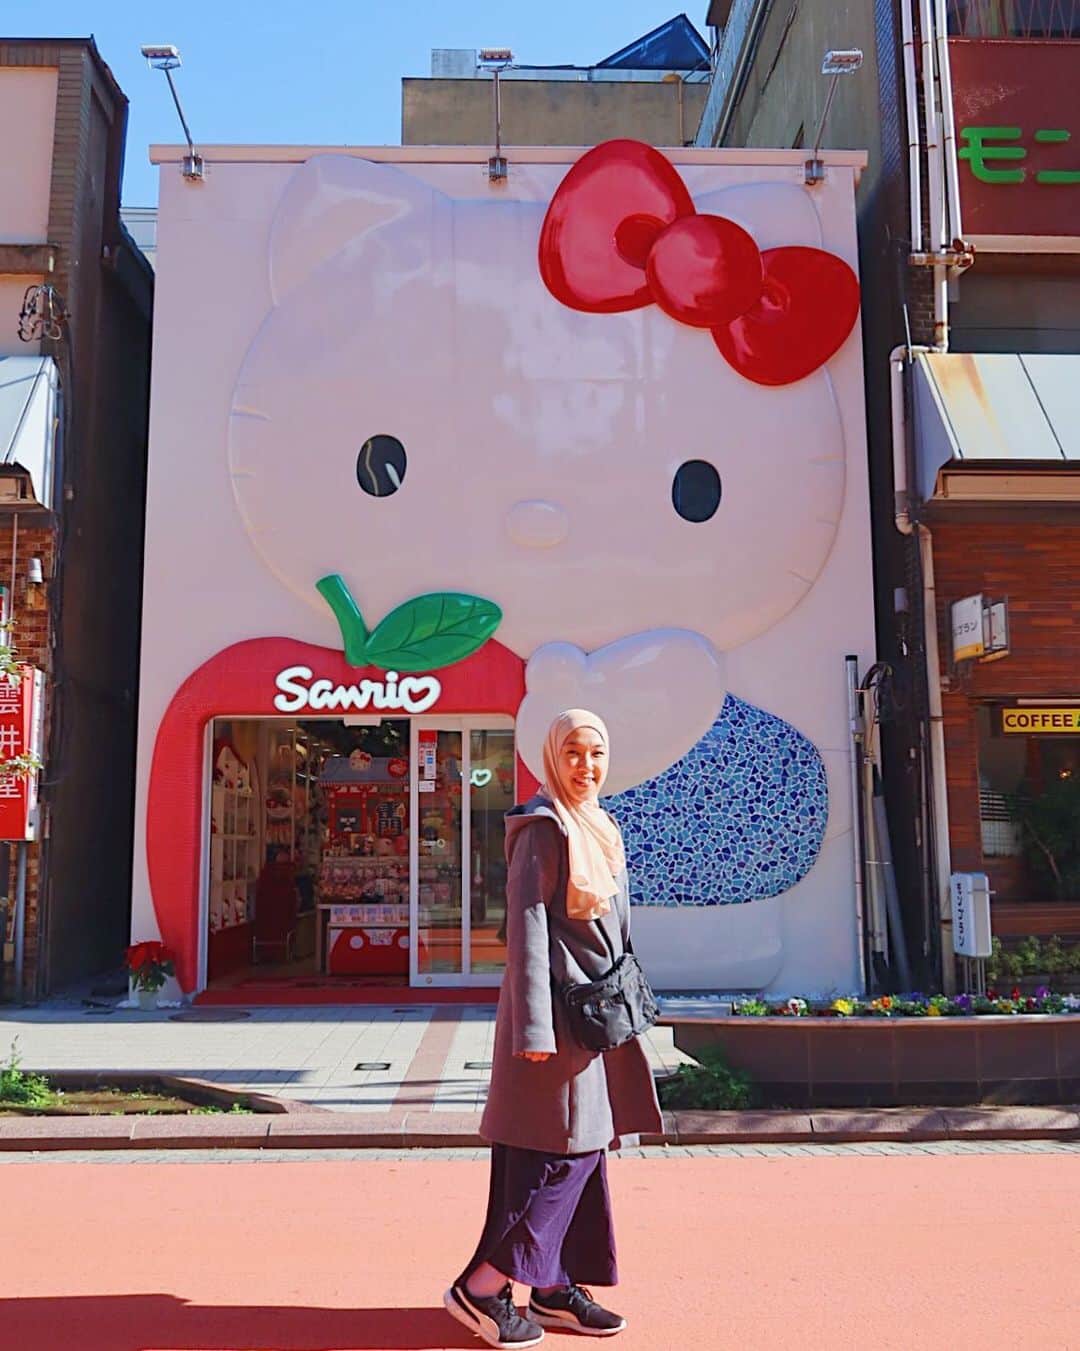 Risa Mizunoのインスタグラム：「Do you know there is a Mega Hello Kitty store in Asakusa? 🎀  I found this super cute shop when I visited Asakusa last time and it says newly opened last April❤️ There is always something new to find. Never gets enough to explore Tokyo! 📍Sanrio Gift Gate Asakusa 1-17-5 Asakusa Taito-Ku, Tokyo  #japanesemuslim #japanesemuslimah #muslim #muslimah #japan #tokyo #shinjuku #japanese #muslimahtokyo #hijab #travel #japantrip #tokyotrip #traveljapan #japanlife #🇲🇾 #🇯🇵 #asakusa #hellokitty #sanrio」